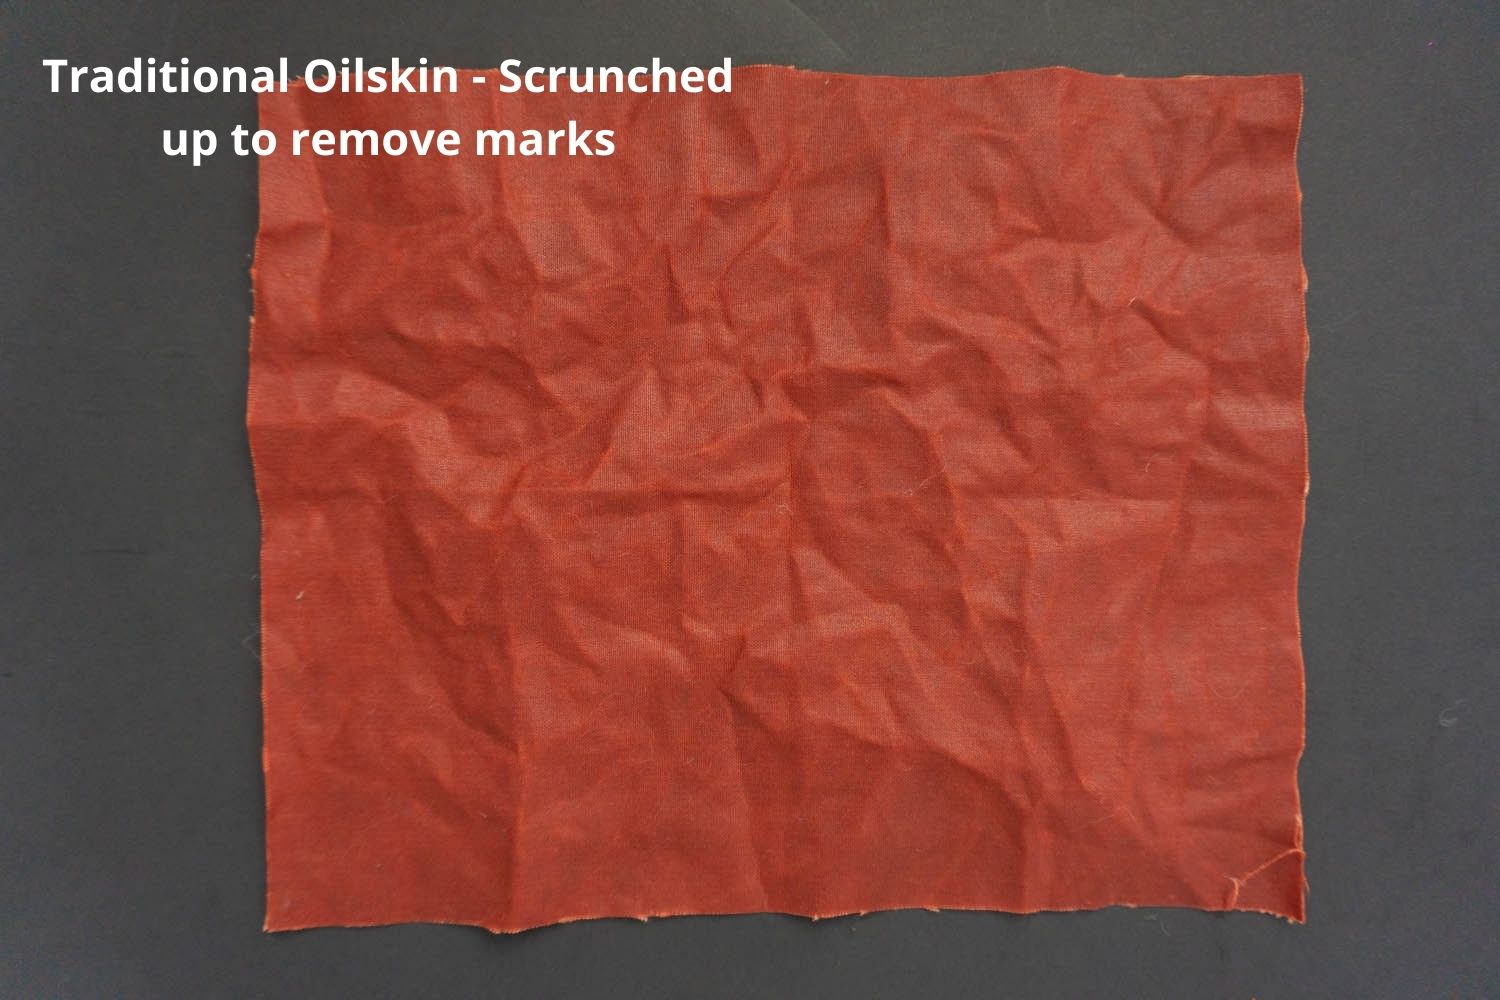 conker coloured traditional oilskin on a dark background that has been scrunched up 